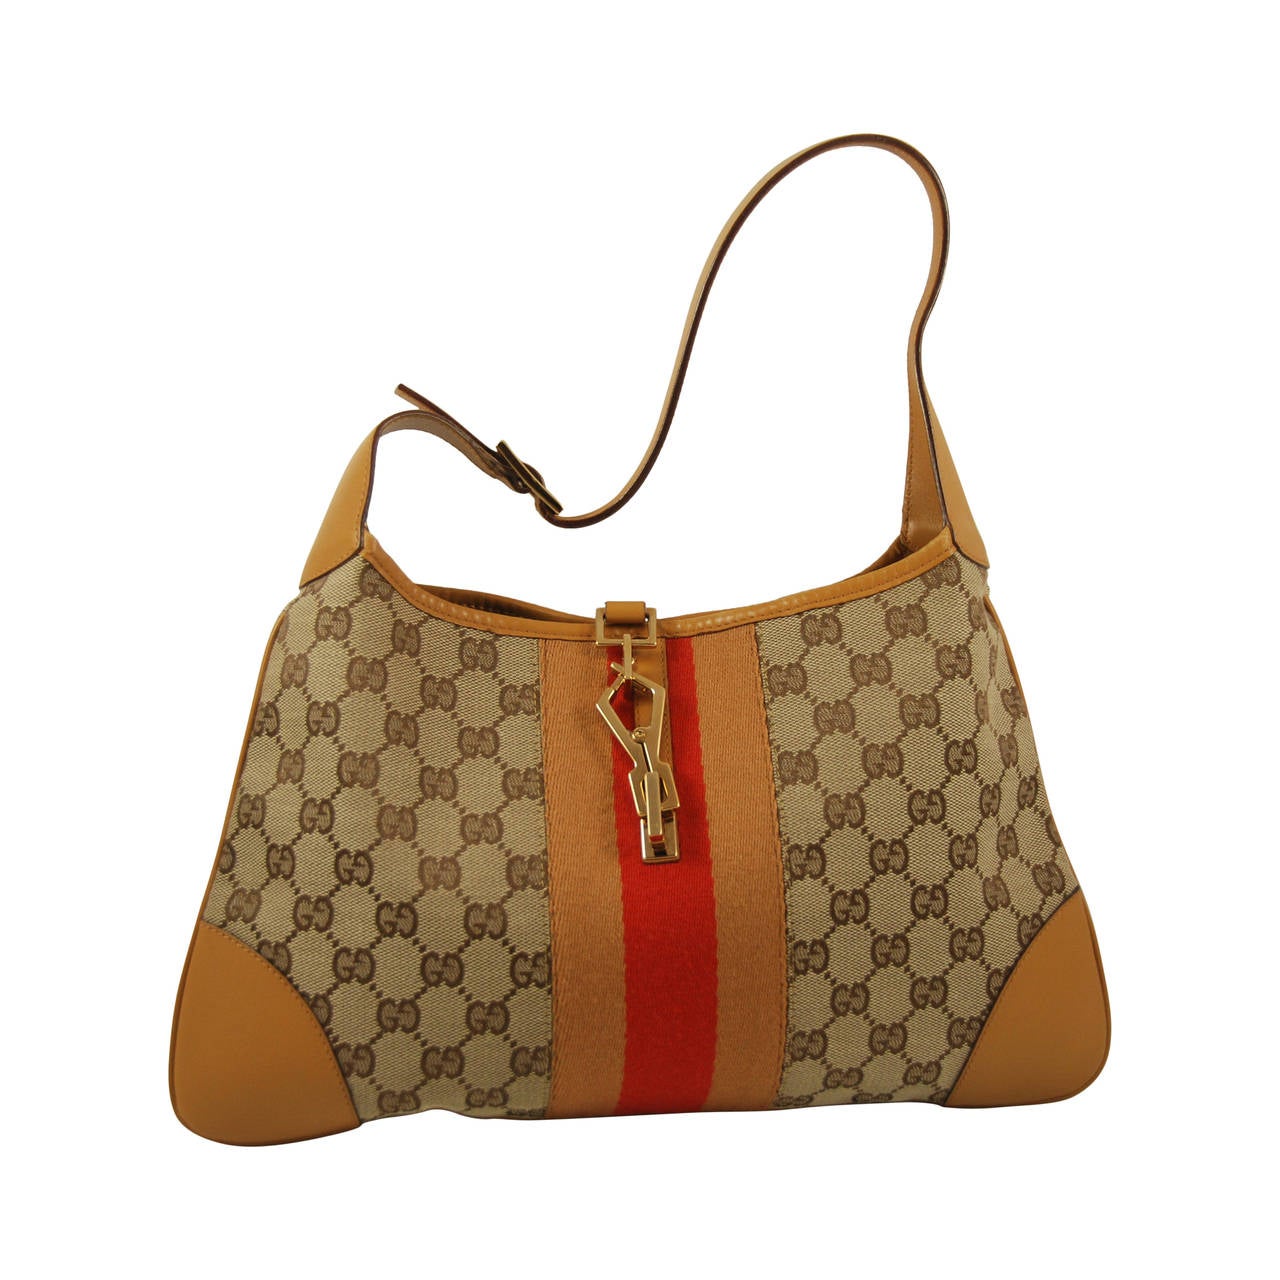 Gucci Golden Mustard Yellow TrimJackie Bag For Sale